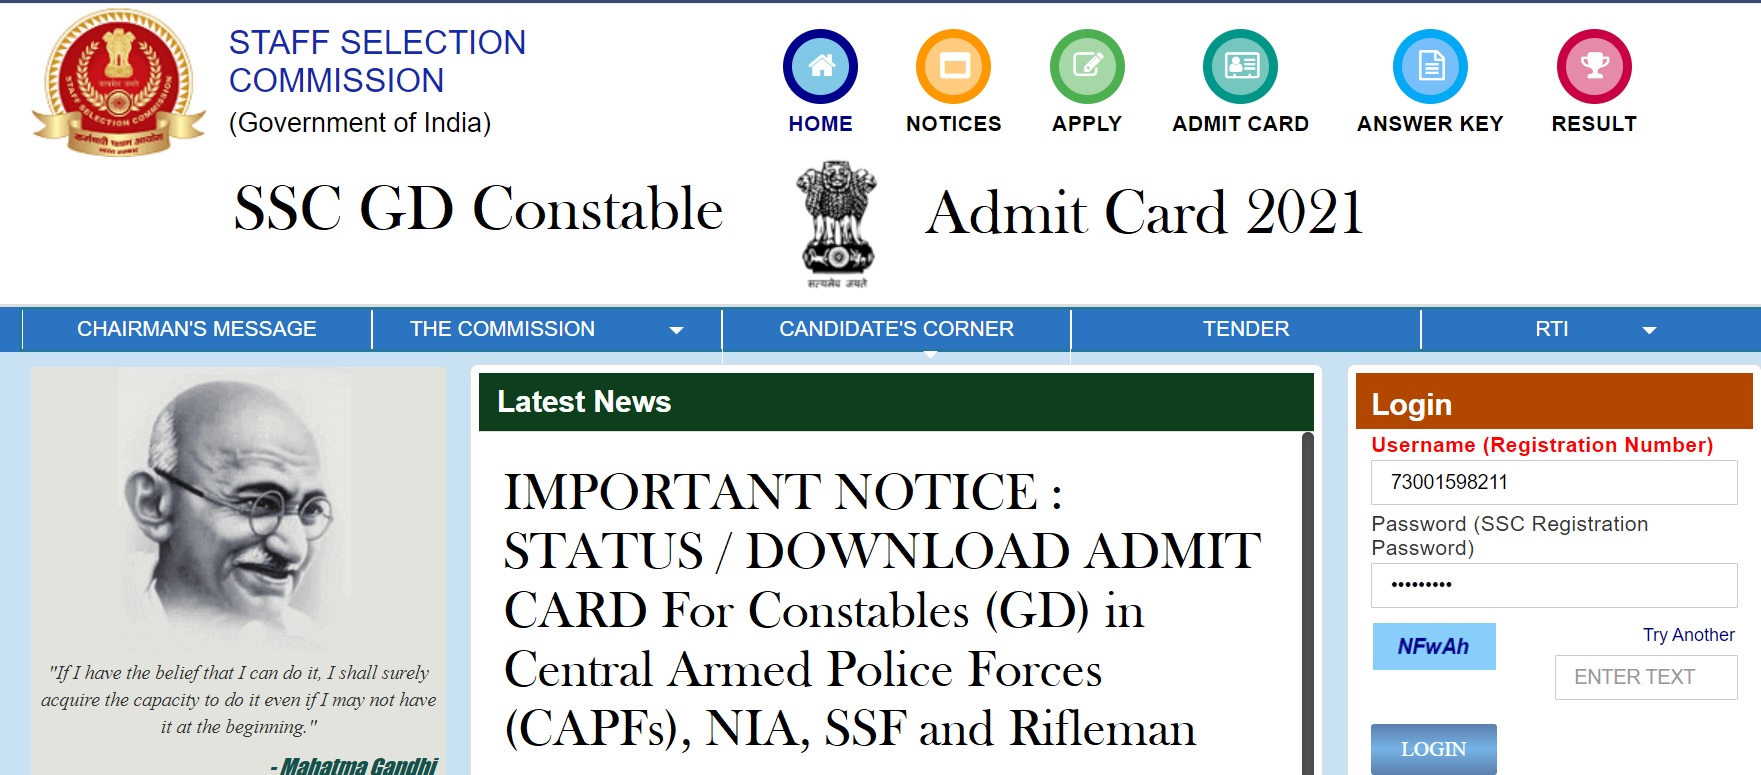 SSC GD Constable Admit Card 2021 (Region Wise Link) Sarkari Result